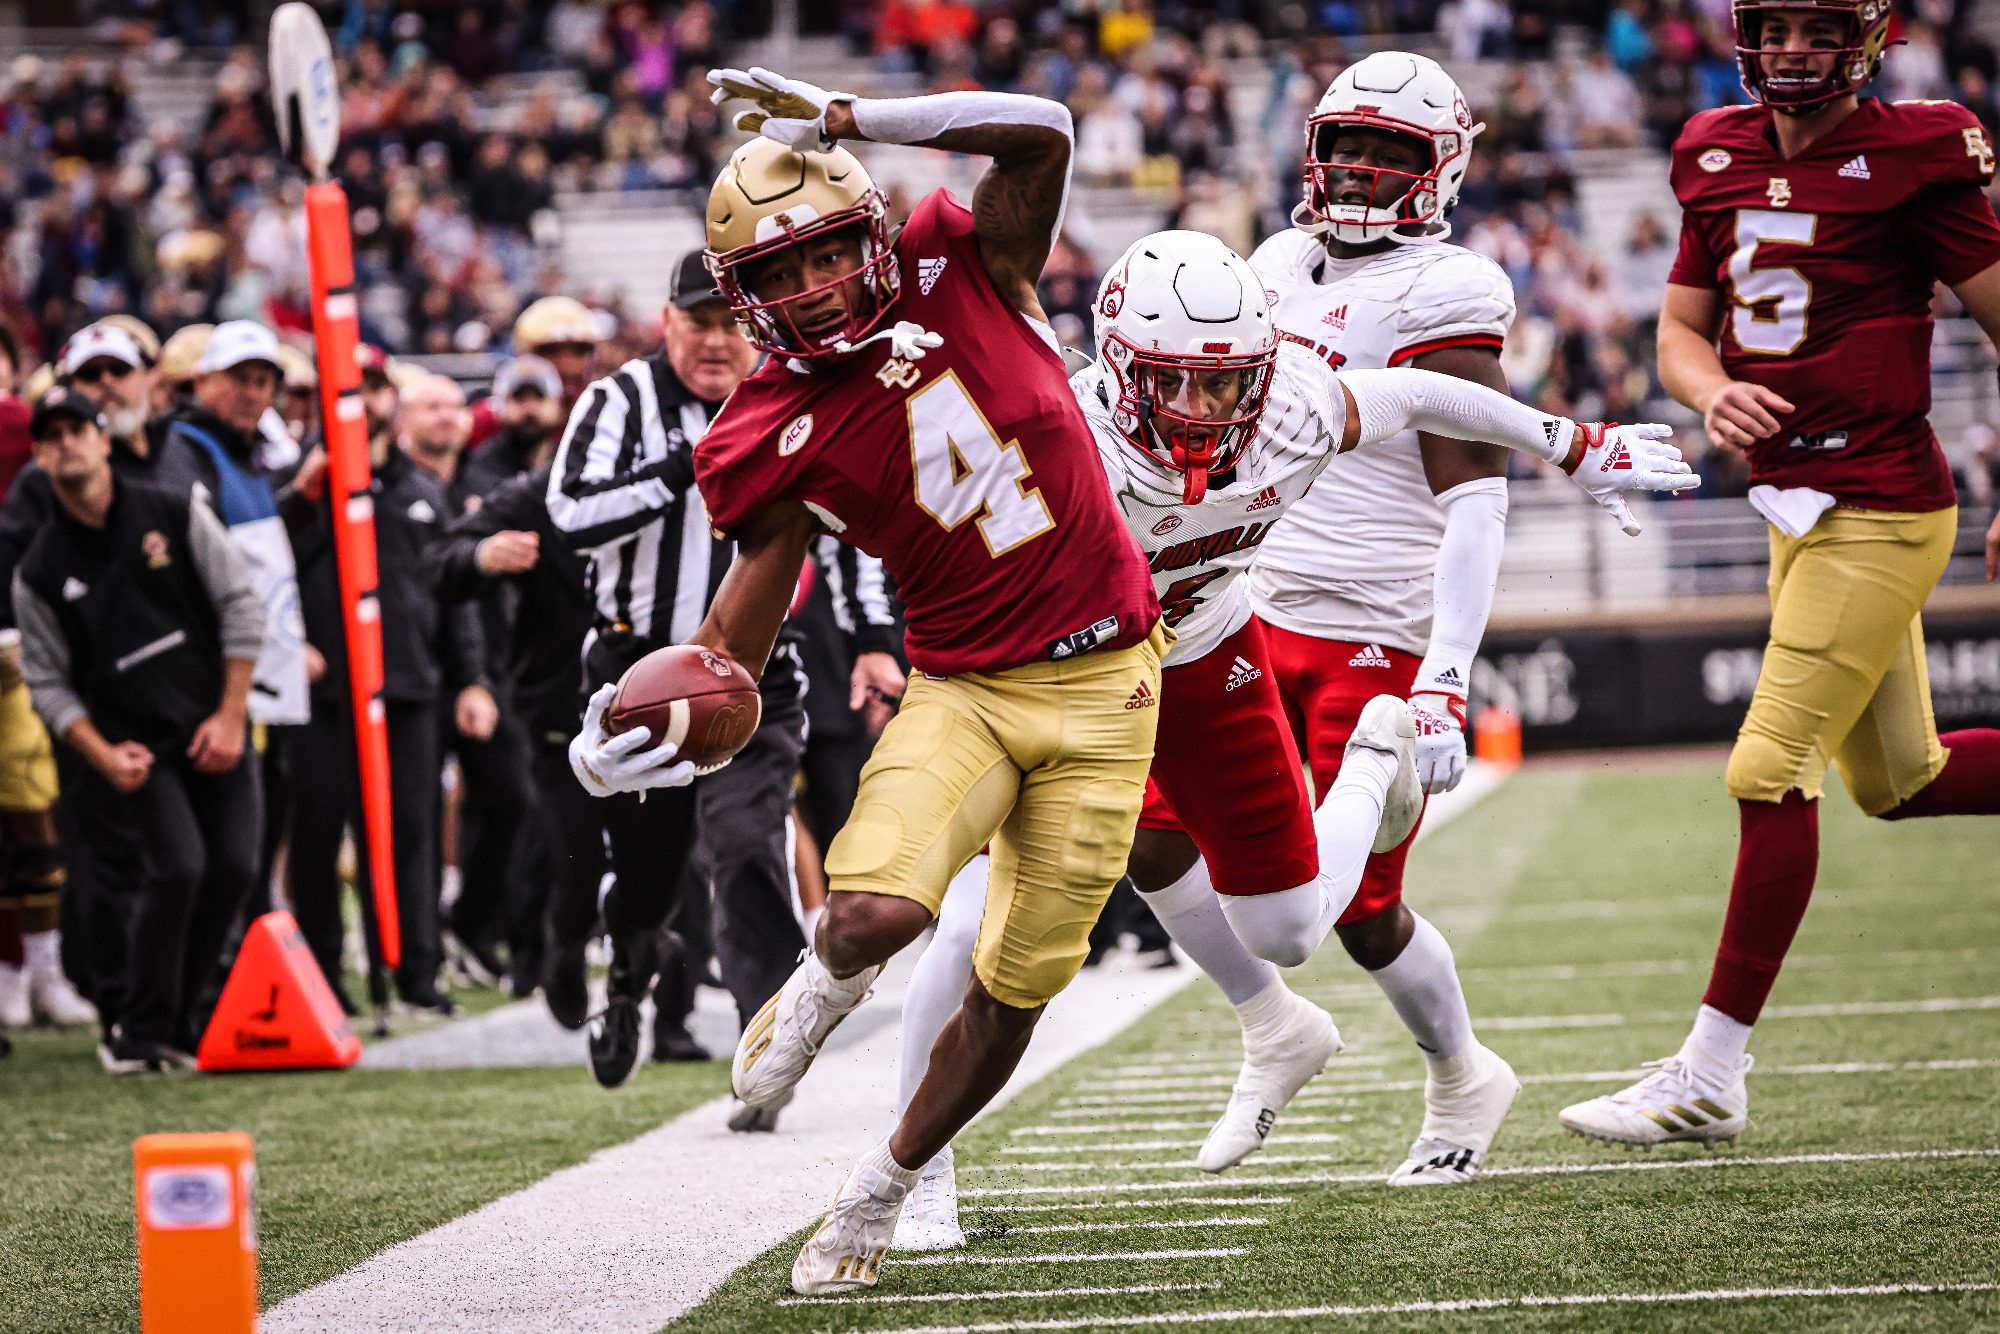 Zay Flowers out of Boston College is a favorite of many NFL draft rankings and evaluators thanks to his fight to win contested catches and explosiveness with the ball in his hands.